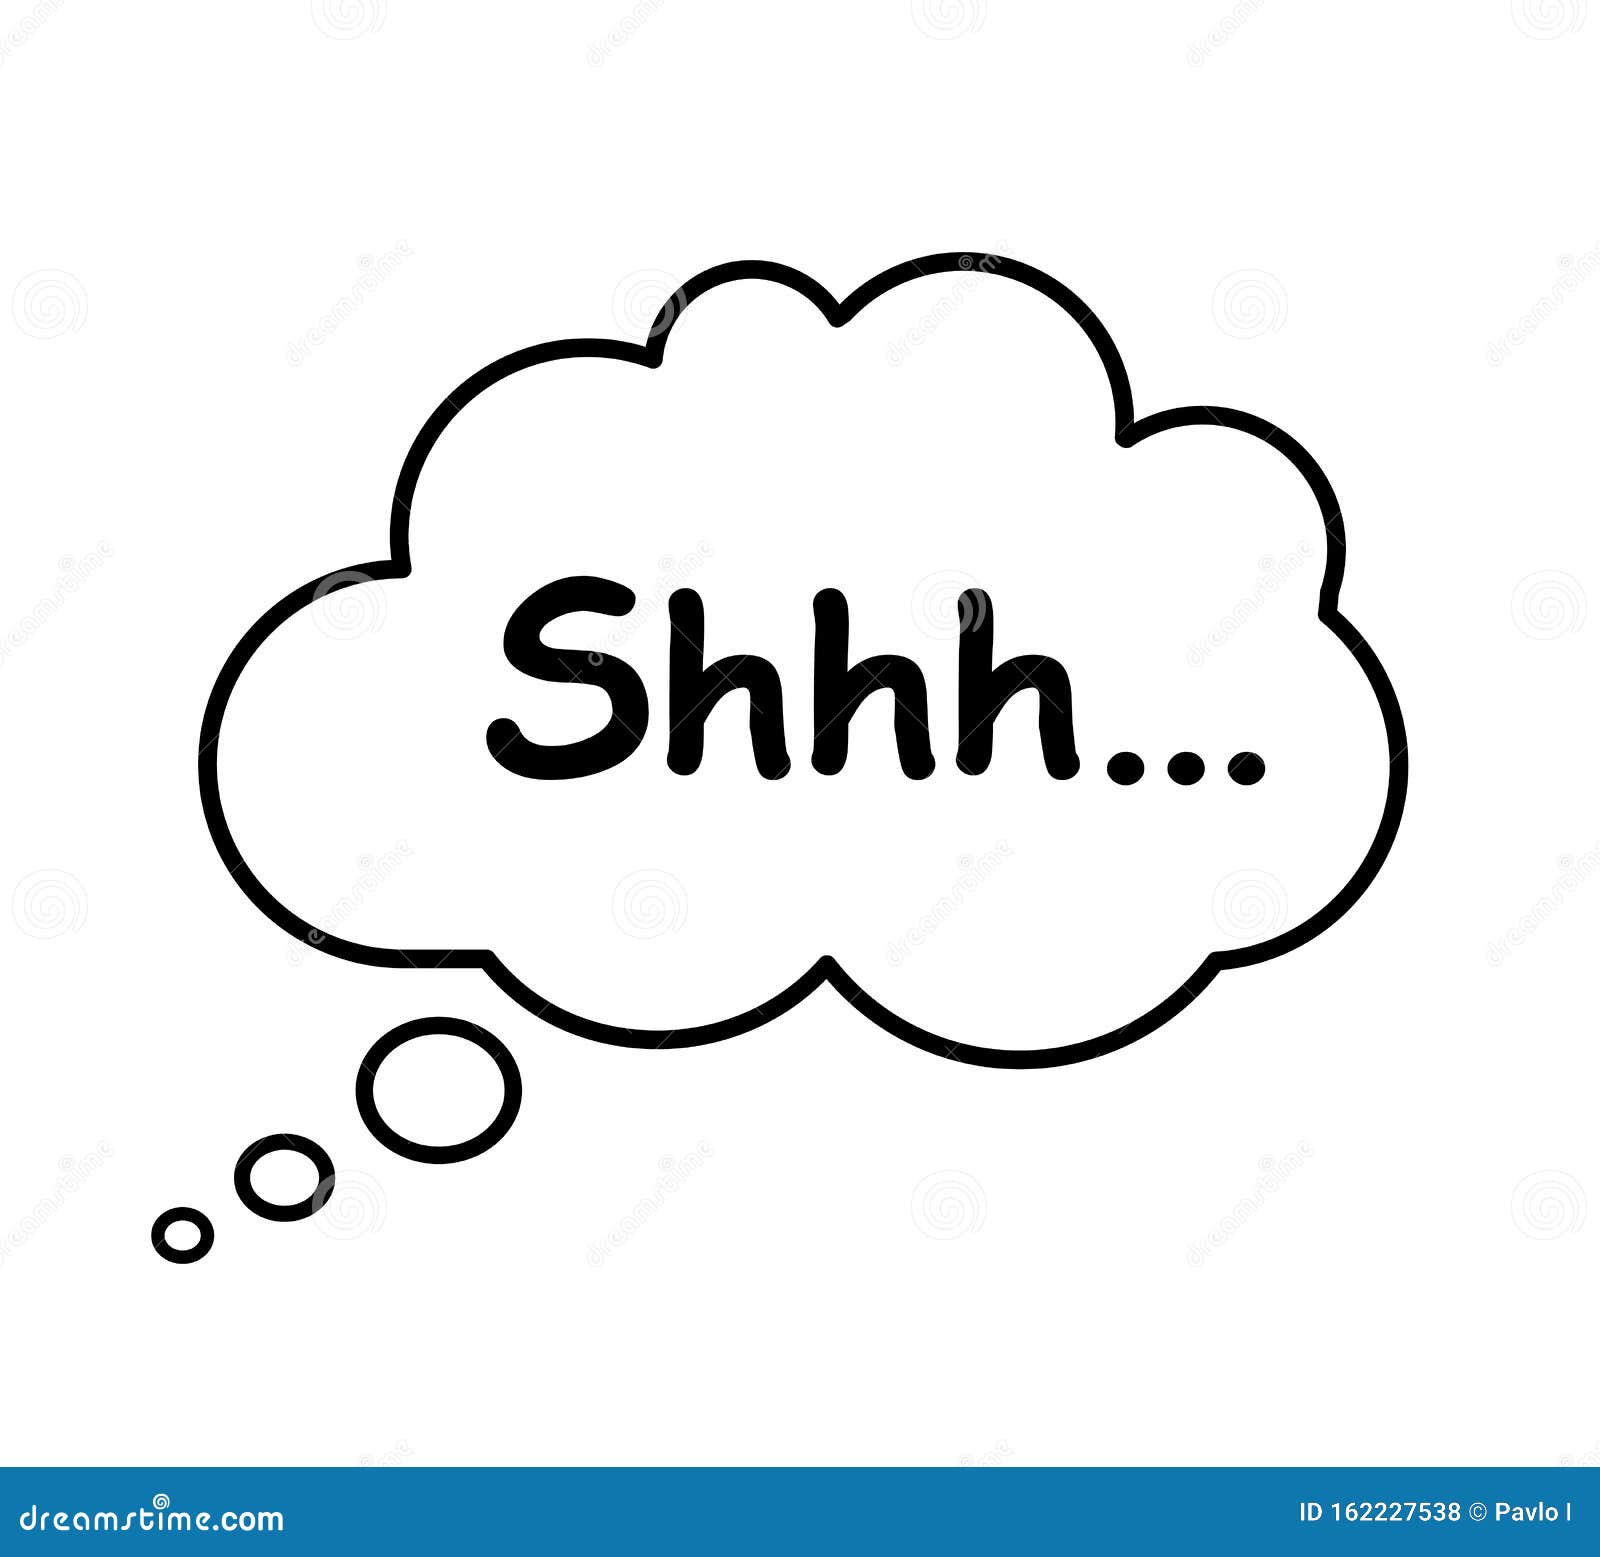 shhh with speech bubble. quiet, please, silent, no talking, no speaking shhh icon. keep silence . keep quiet sign Ã¢â¬â stock